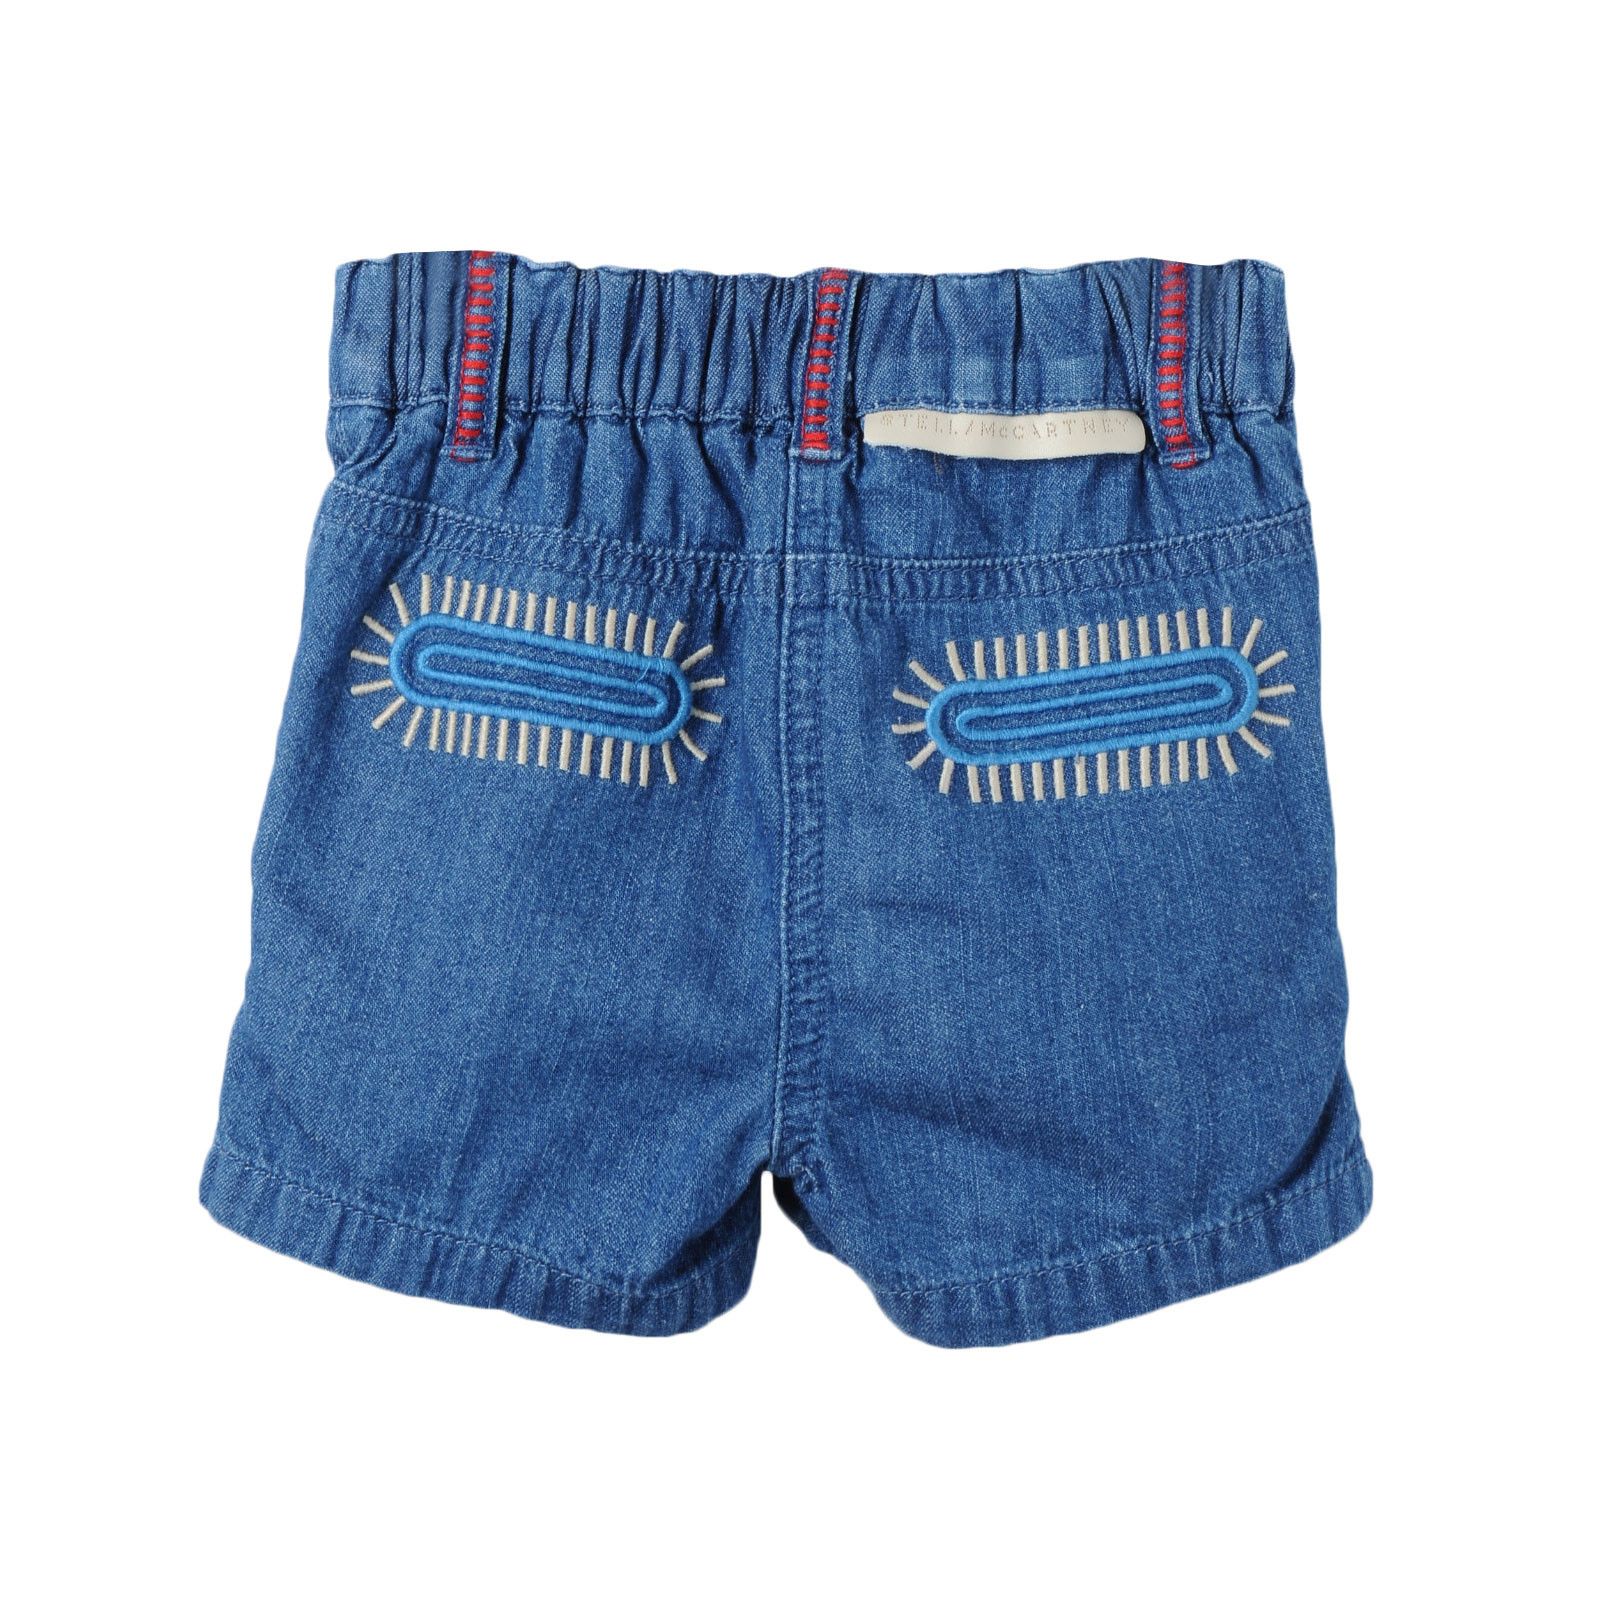 Girls Blue Shorts With Colorful Zig Zag Embroidered Trims - CÉMAROSE | Children's Fashion Store - 2